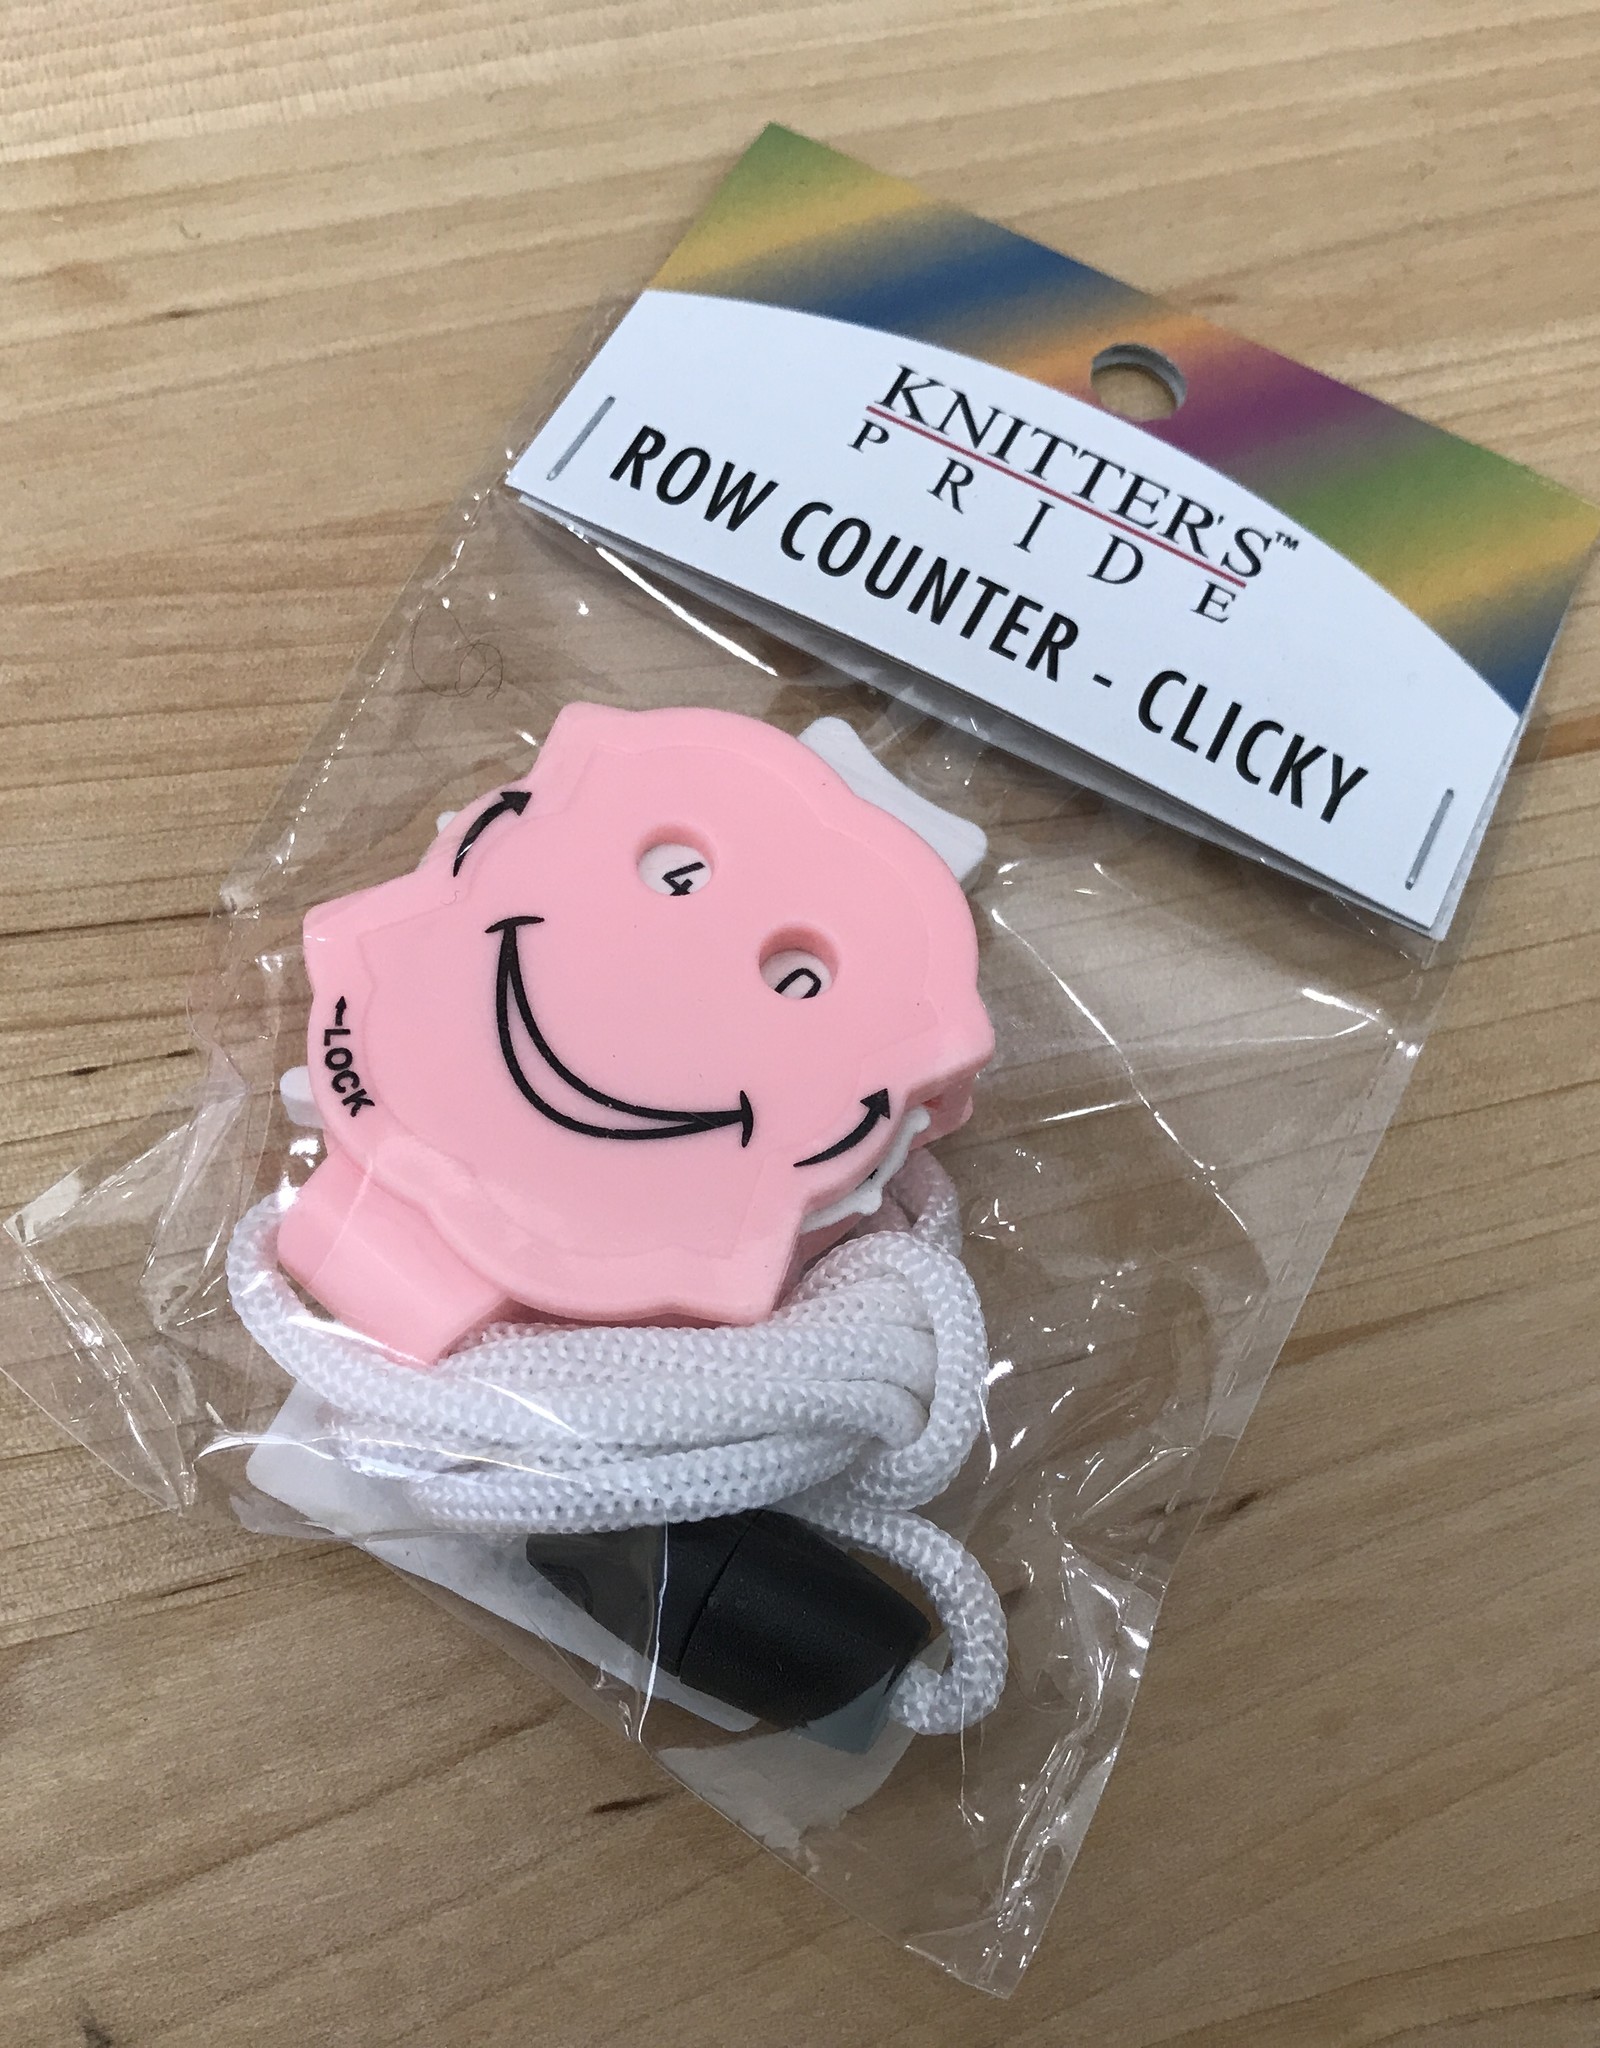 Knitters Pride KP Row Counter Clicky